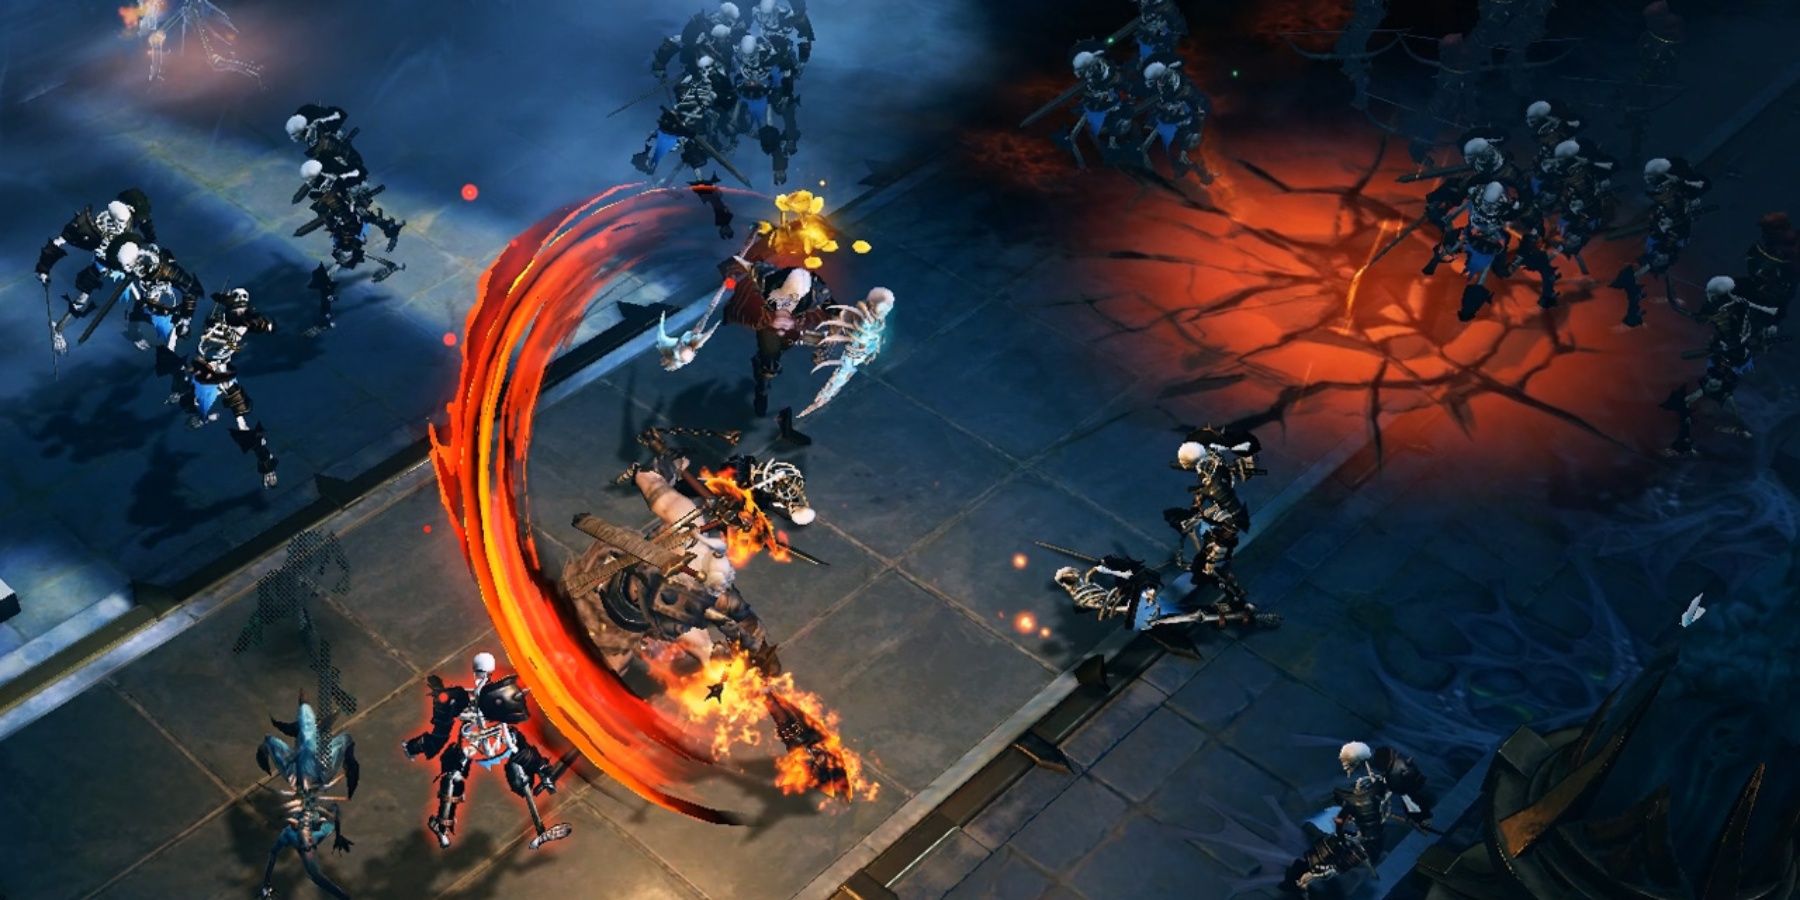 Mobile version of Diablo: Battles that take place in the arena of Immortals. A fire swipe attack will be performed towards the enemy. 